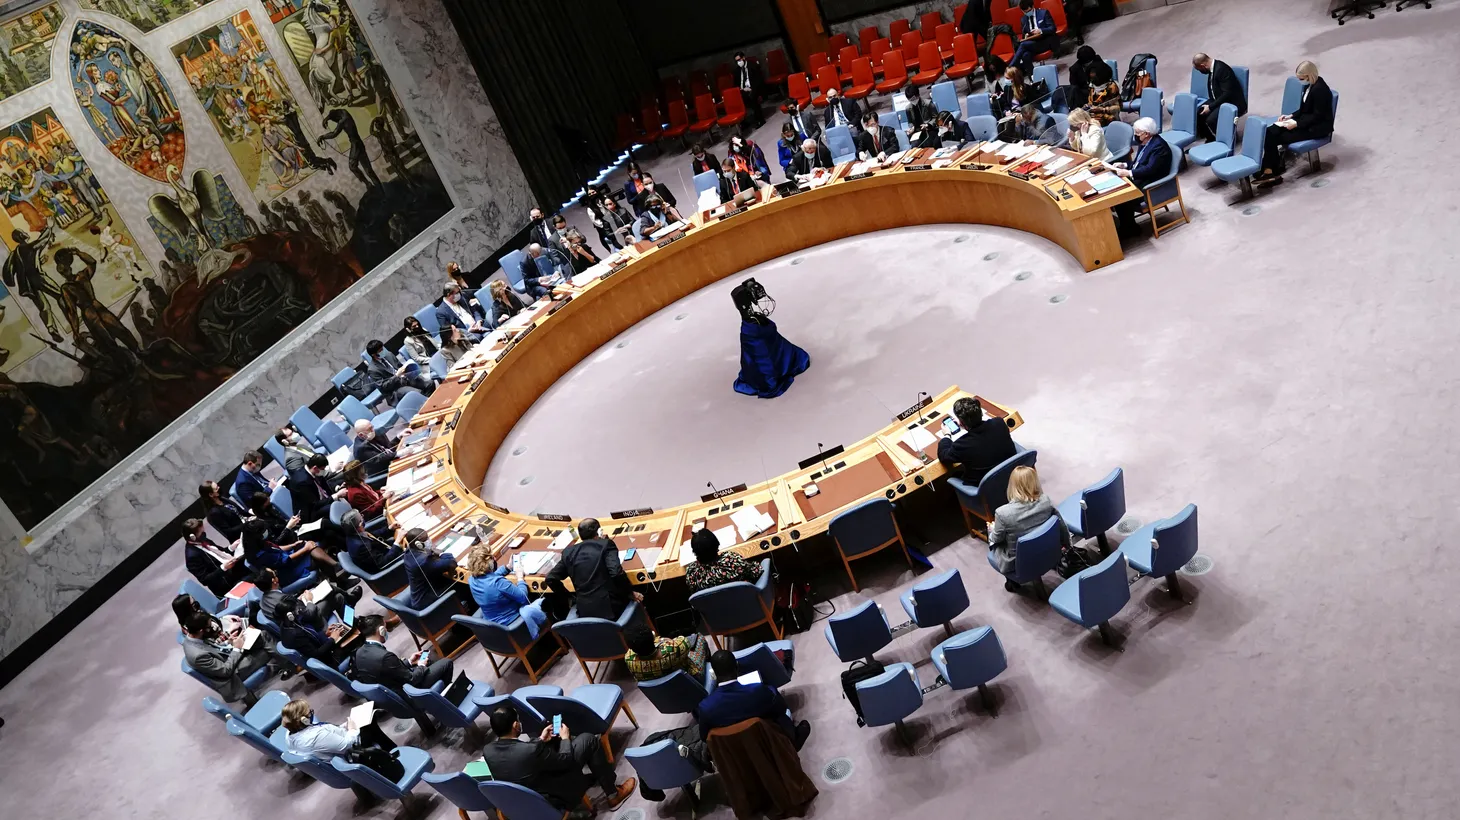 A general view shows the United Nations Security Council meeting on threats to international peace and security, following Russia's invasion of Ukraine, in New York City, U.S., March 7, 2022.